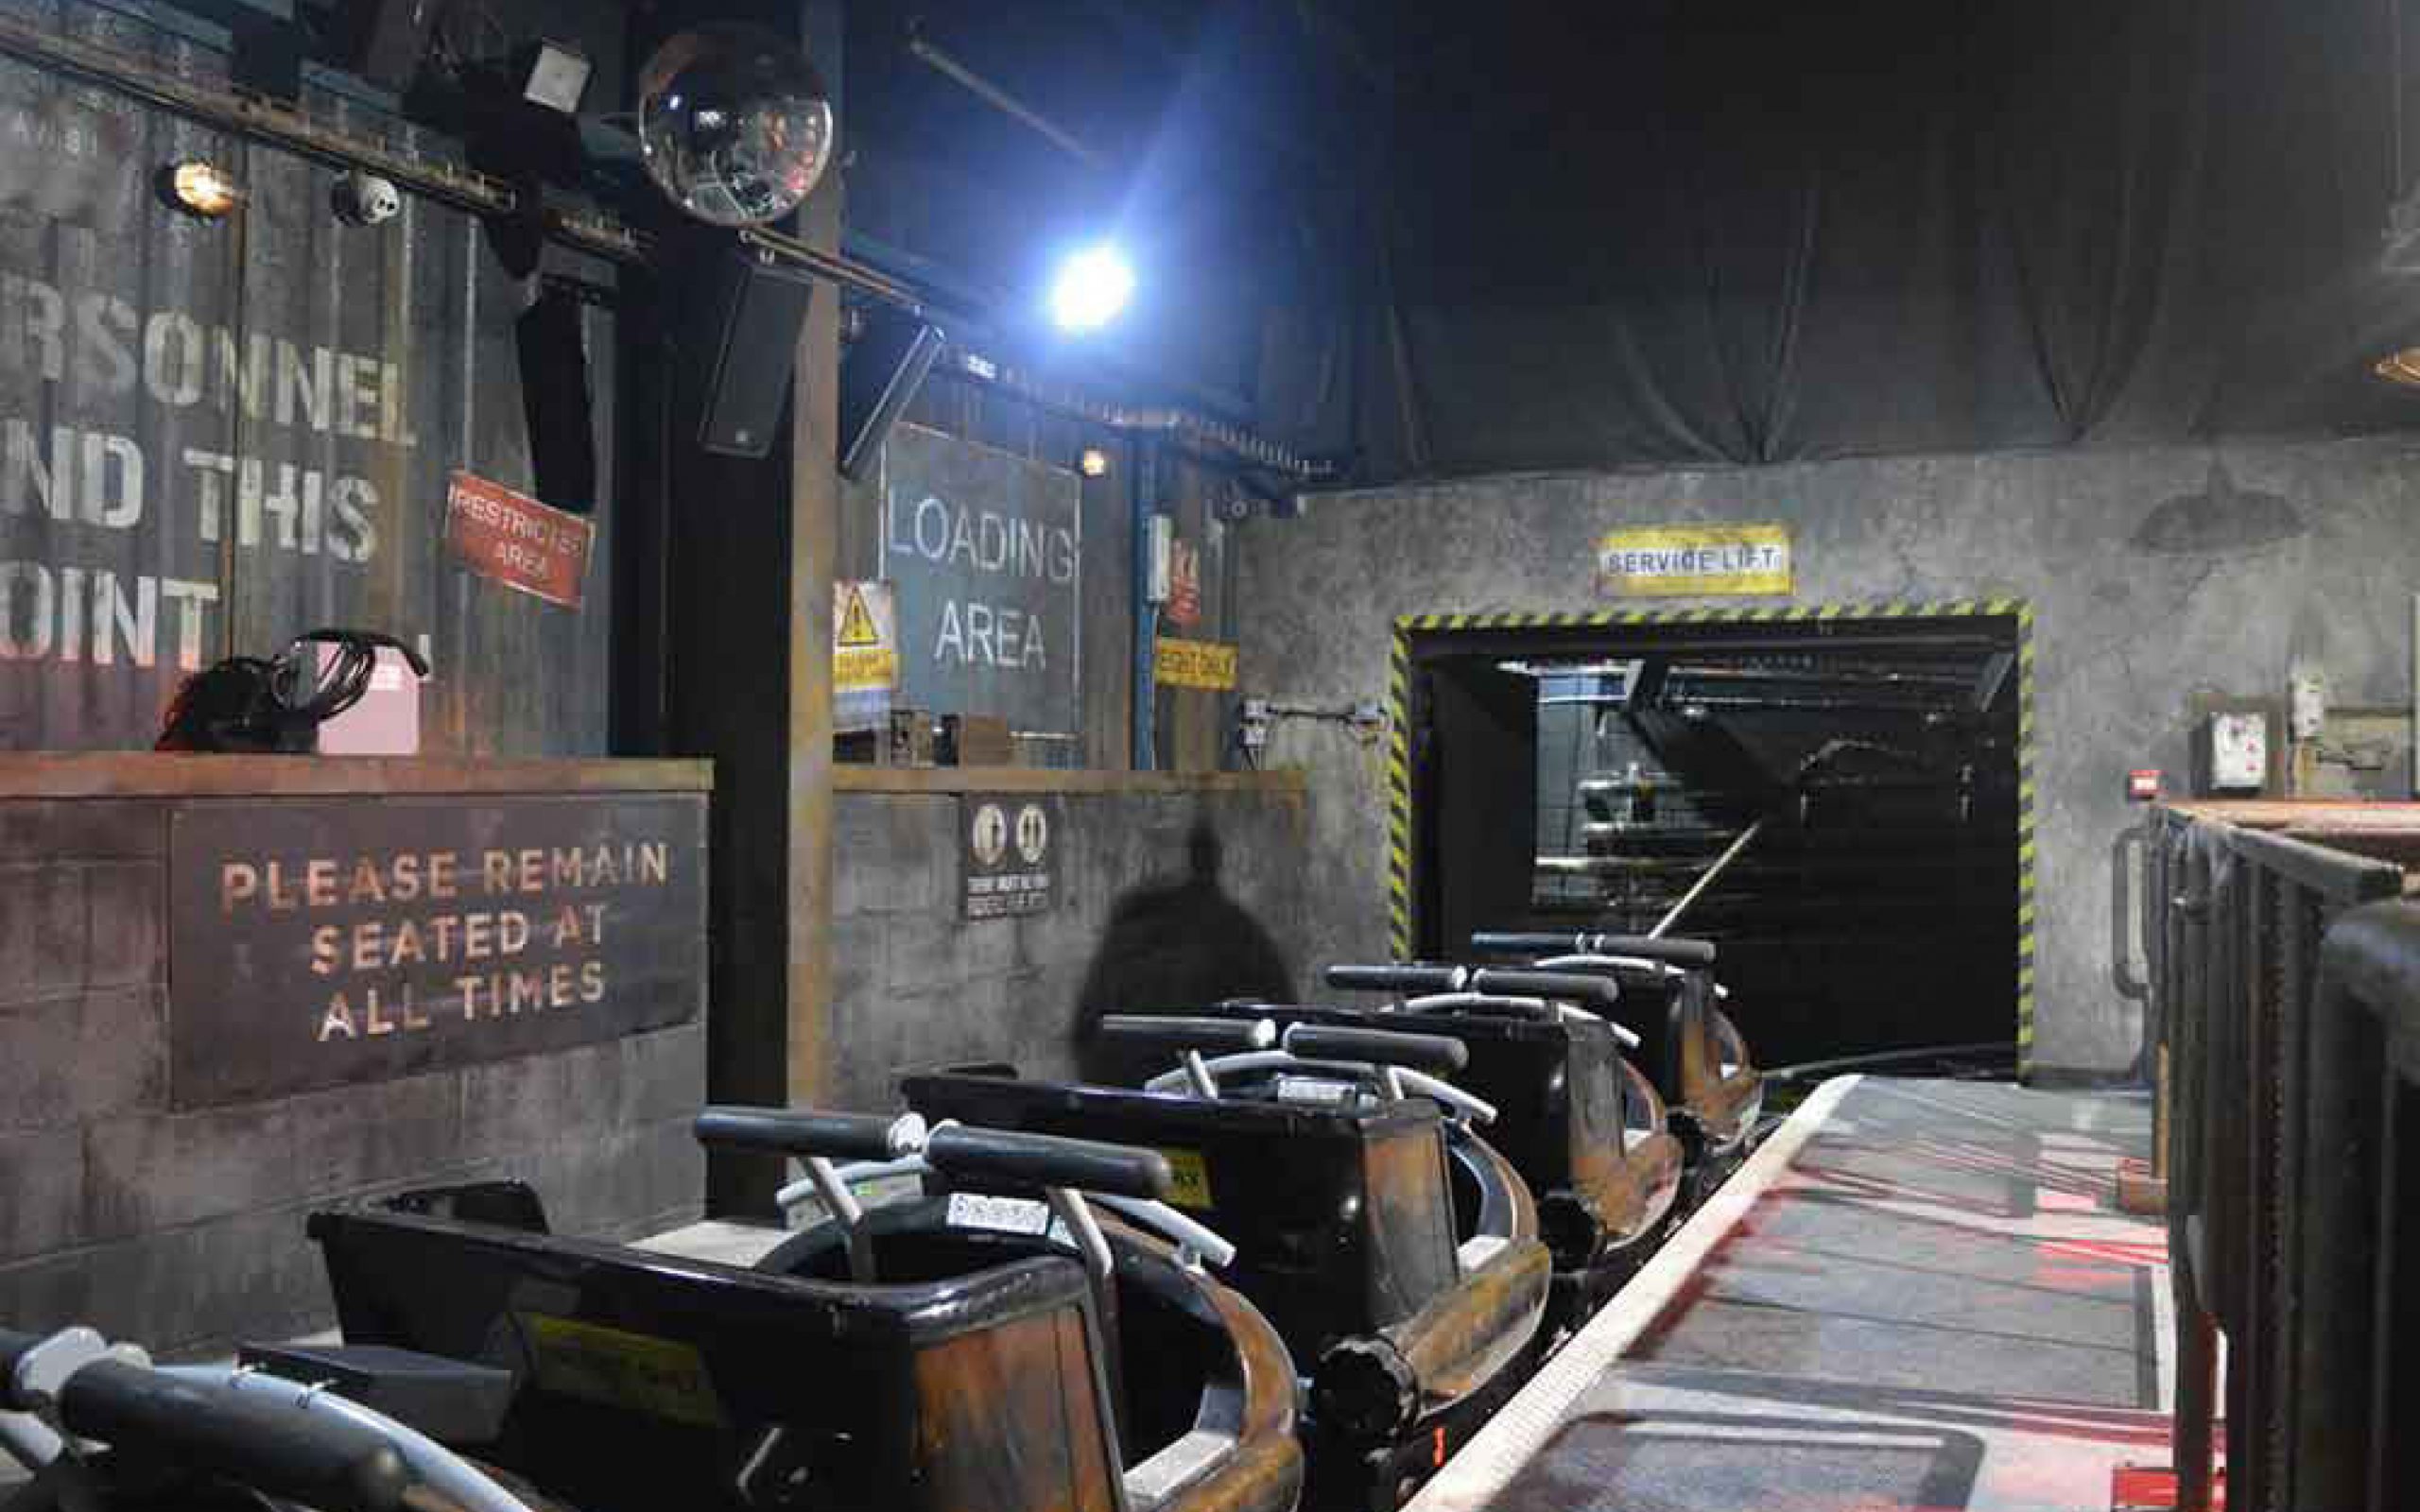 Loading area for Walking Dead The Ride